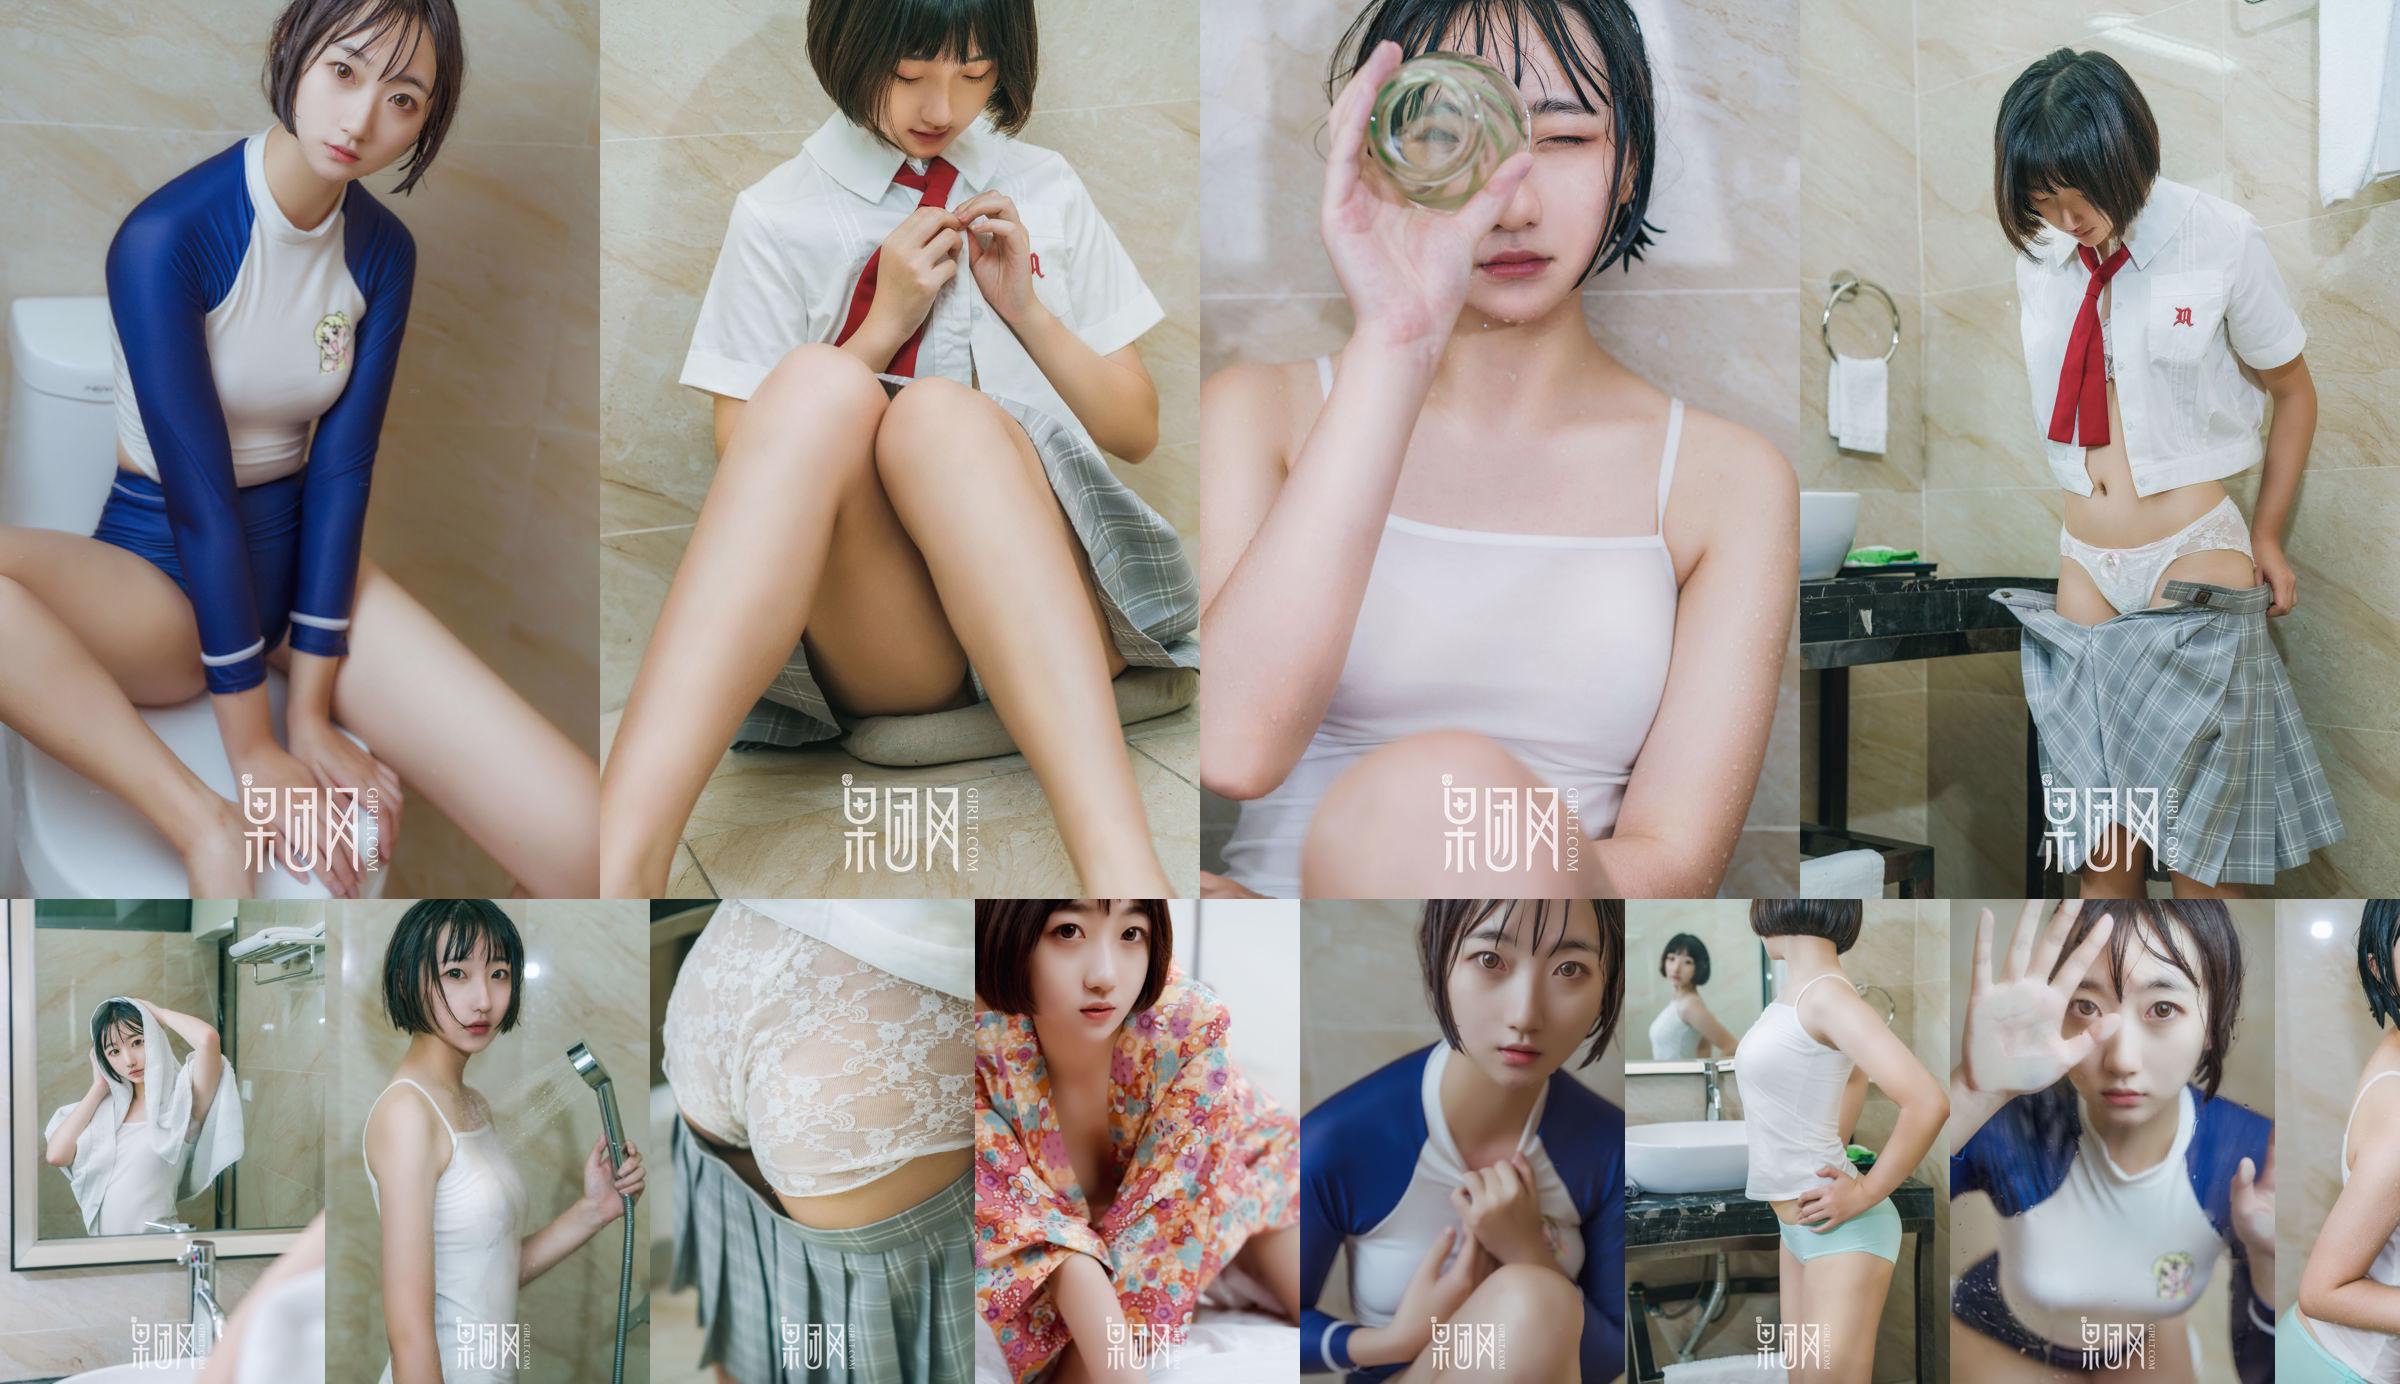 Soft and cute girl Inada Qianhua "Pure Girl" [Guo Group Girl] No.132 No.a9c02f Page 1